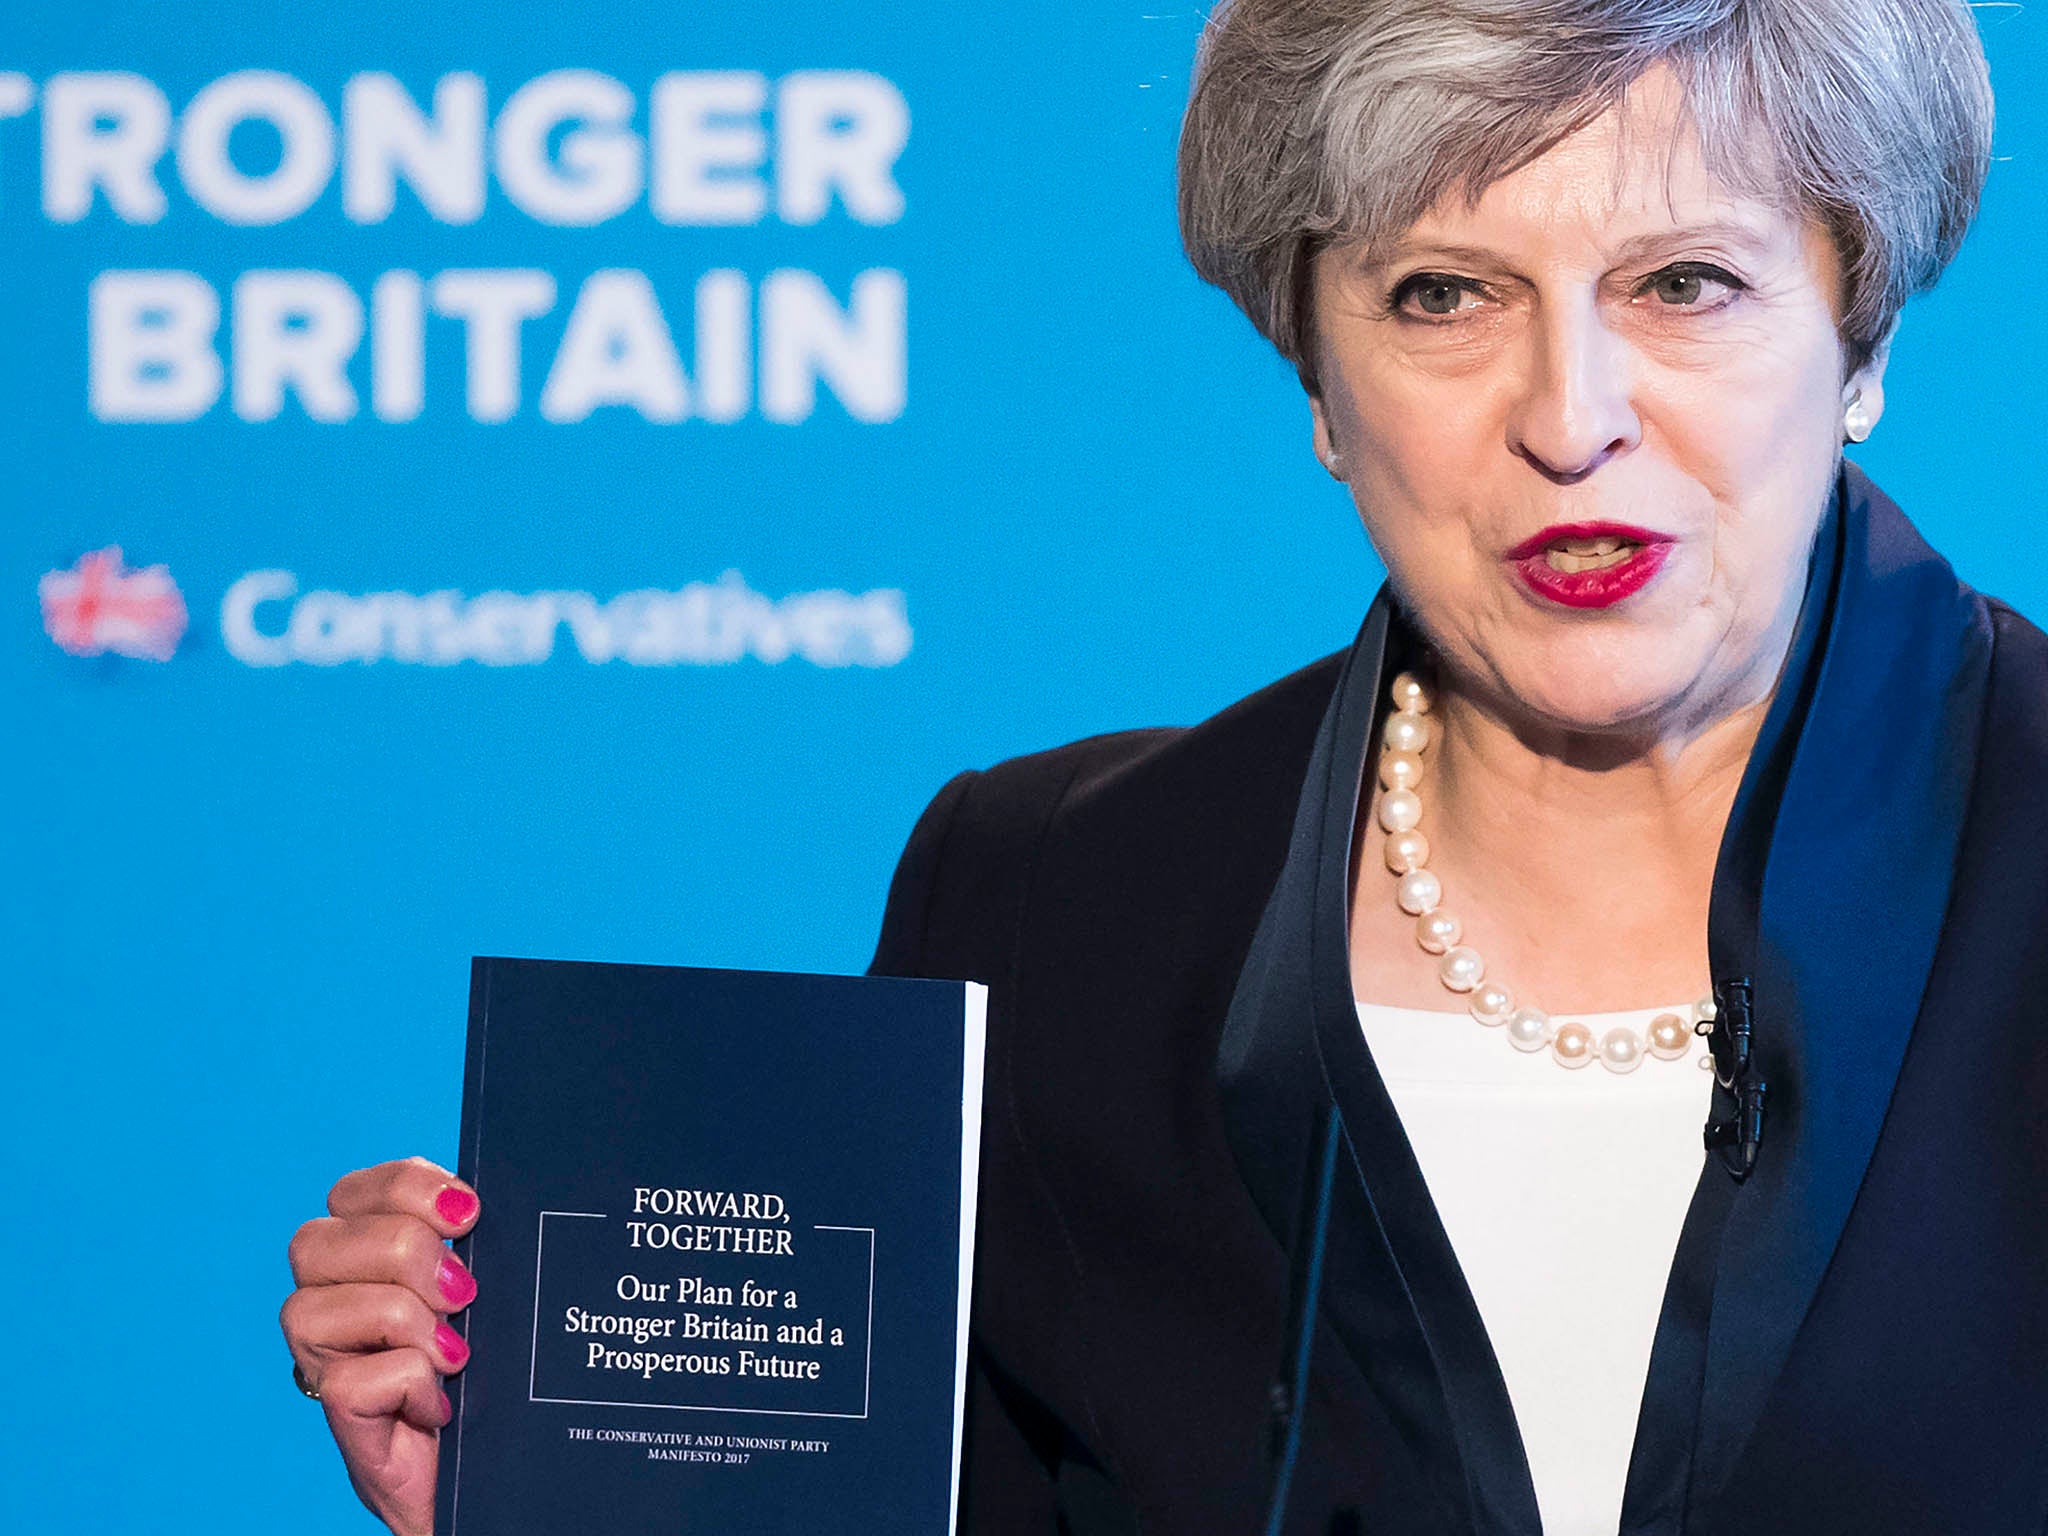 Theresa May unveiled the Conservative's manifesto